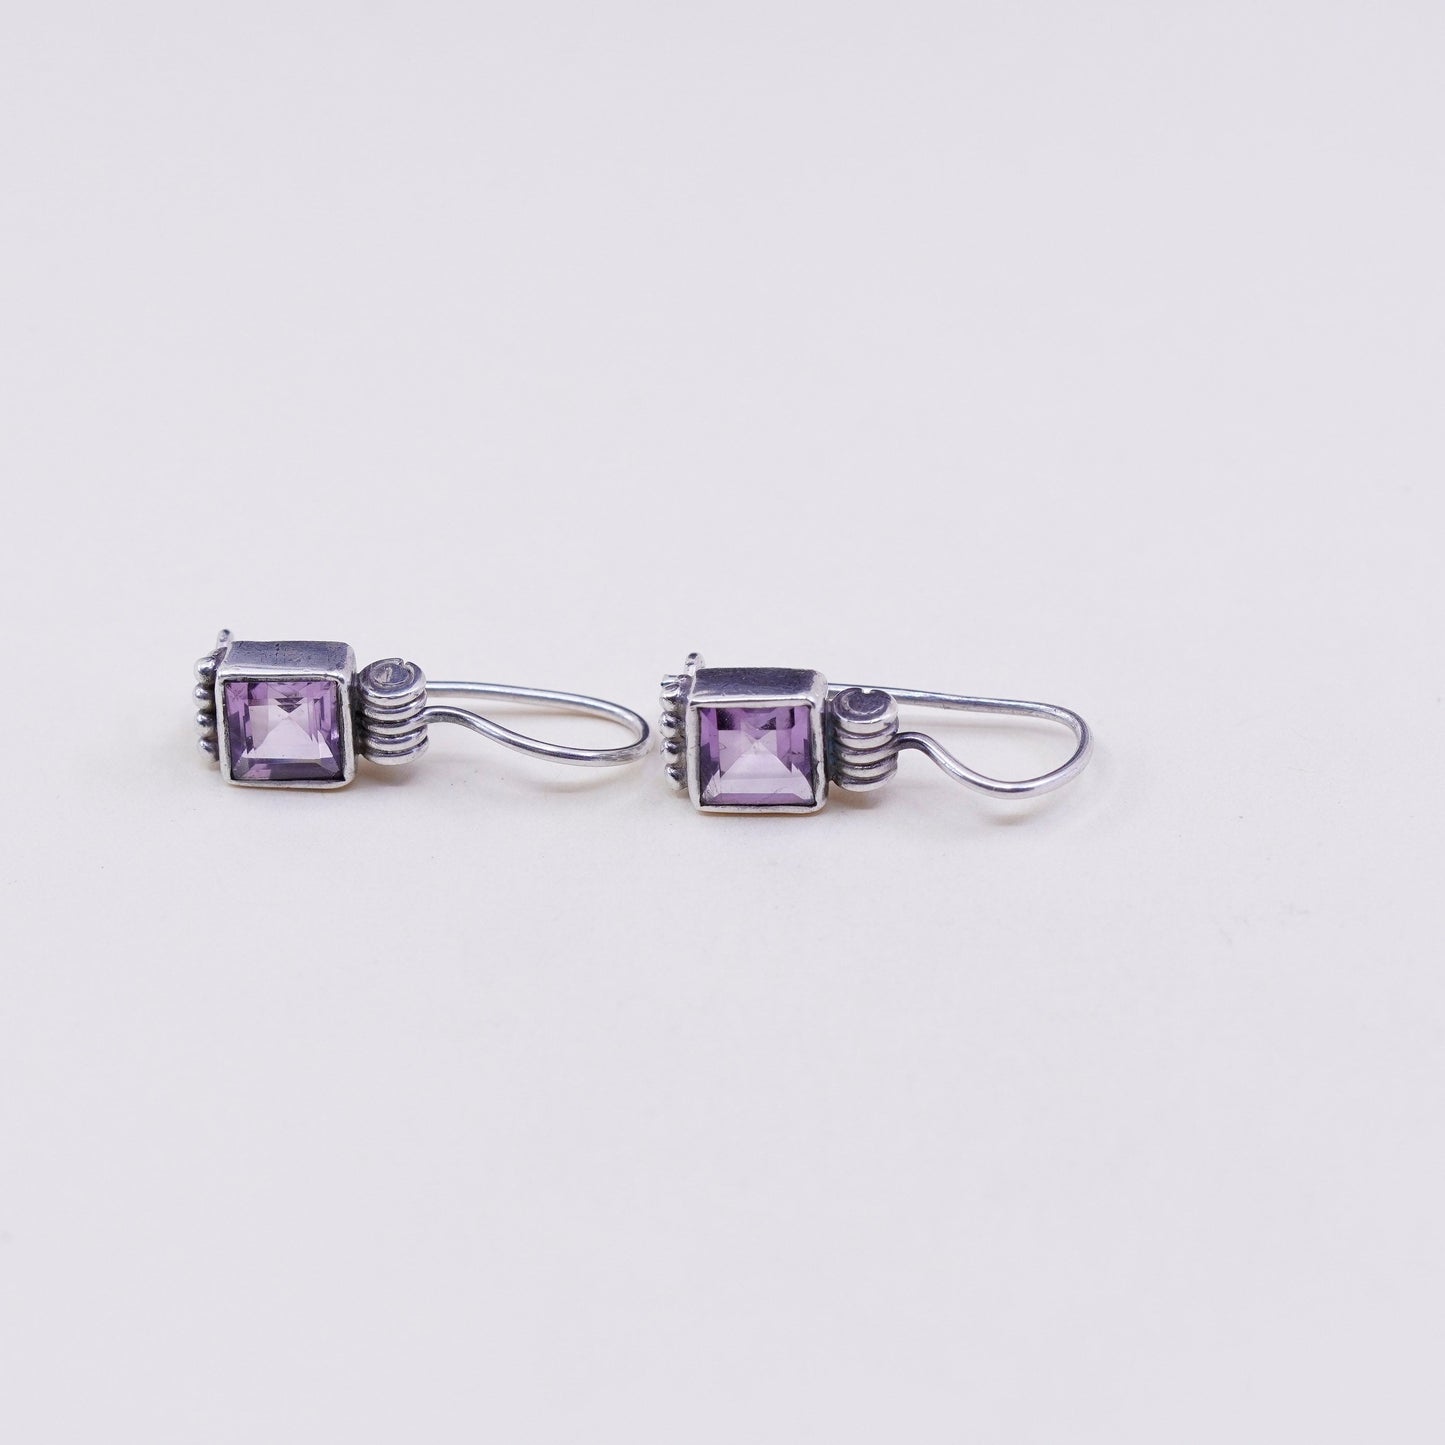 Vintage sterling silver handmade earrings, 925 with square amethyst drops